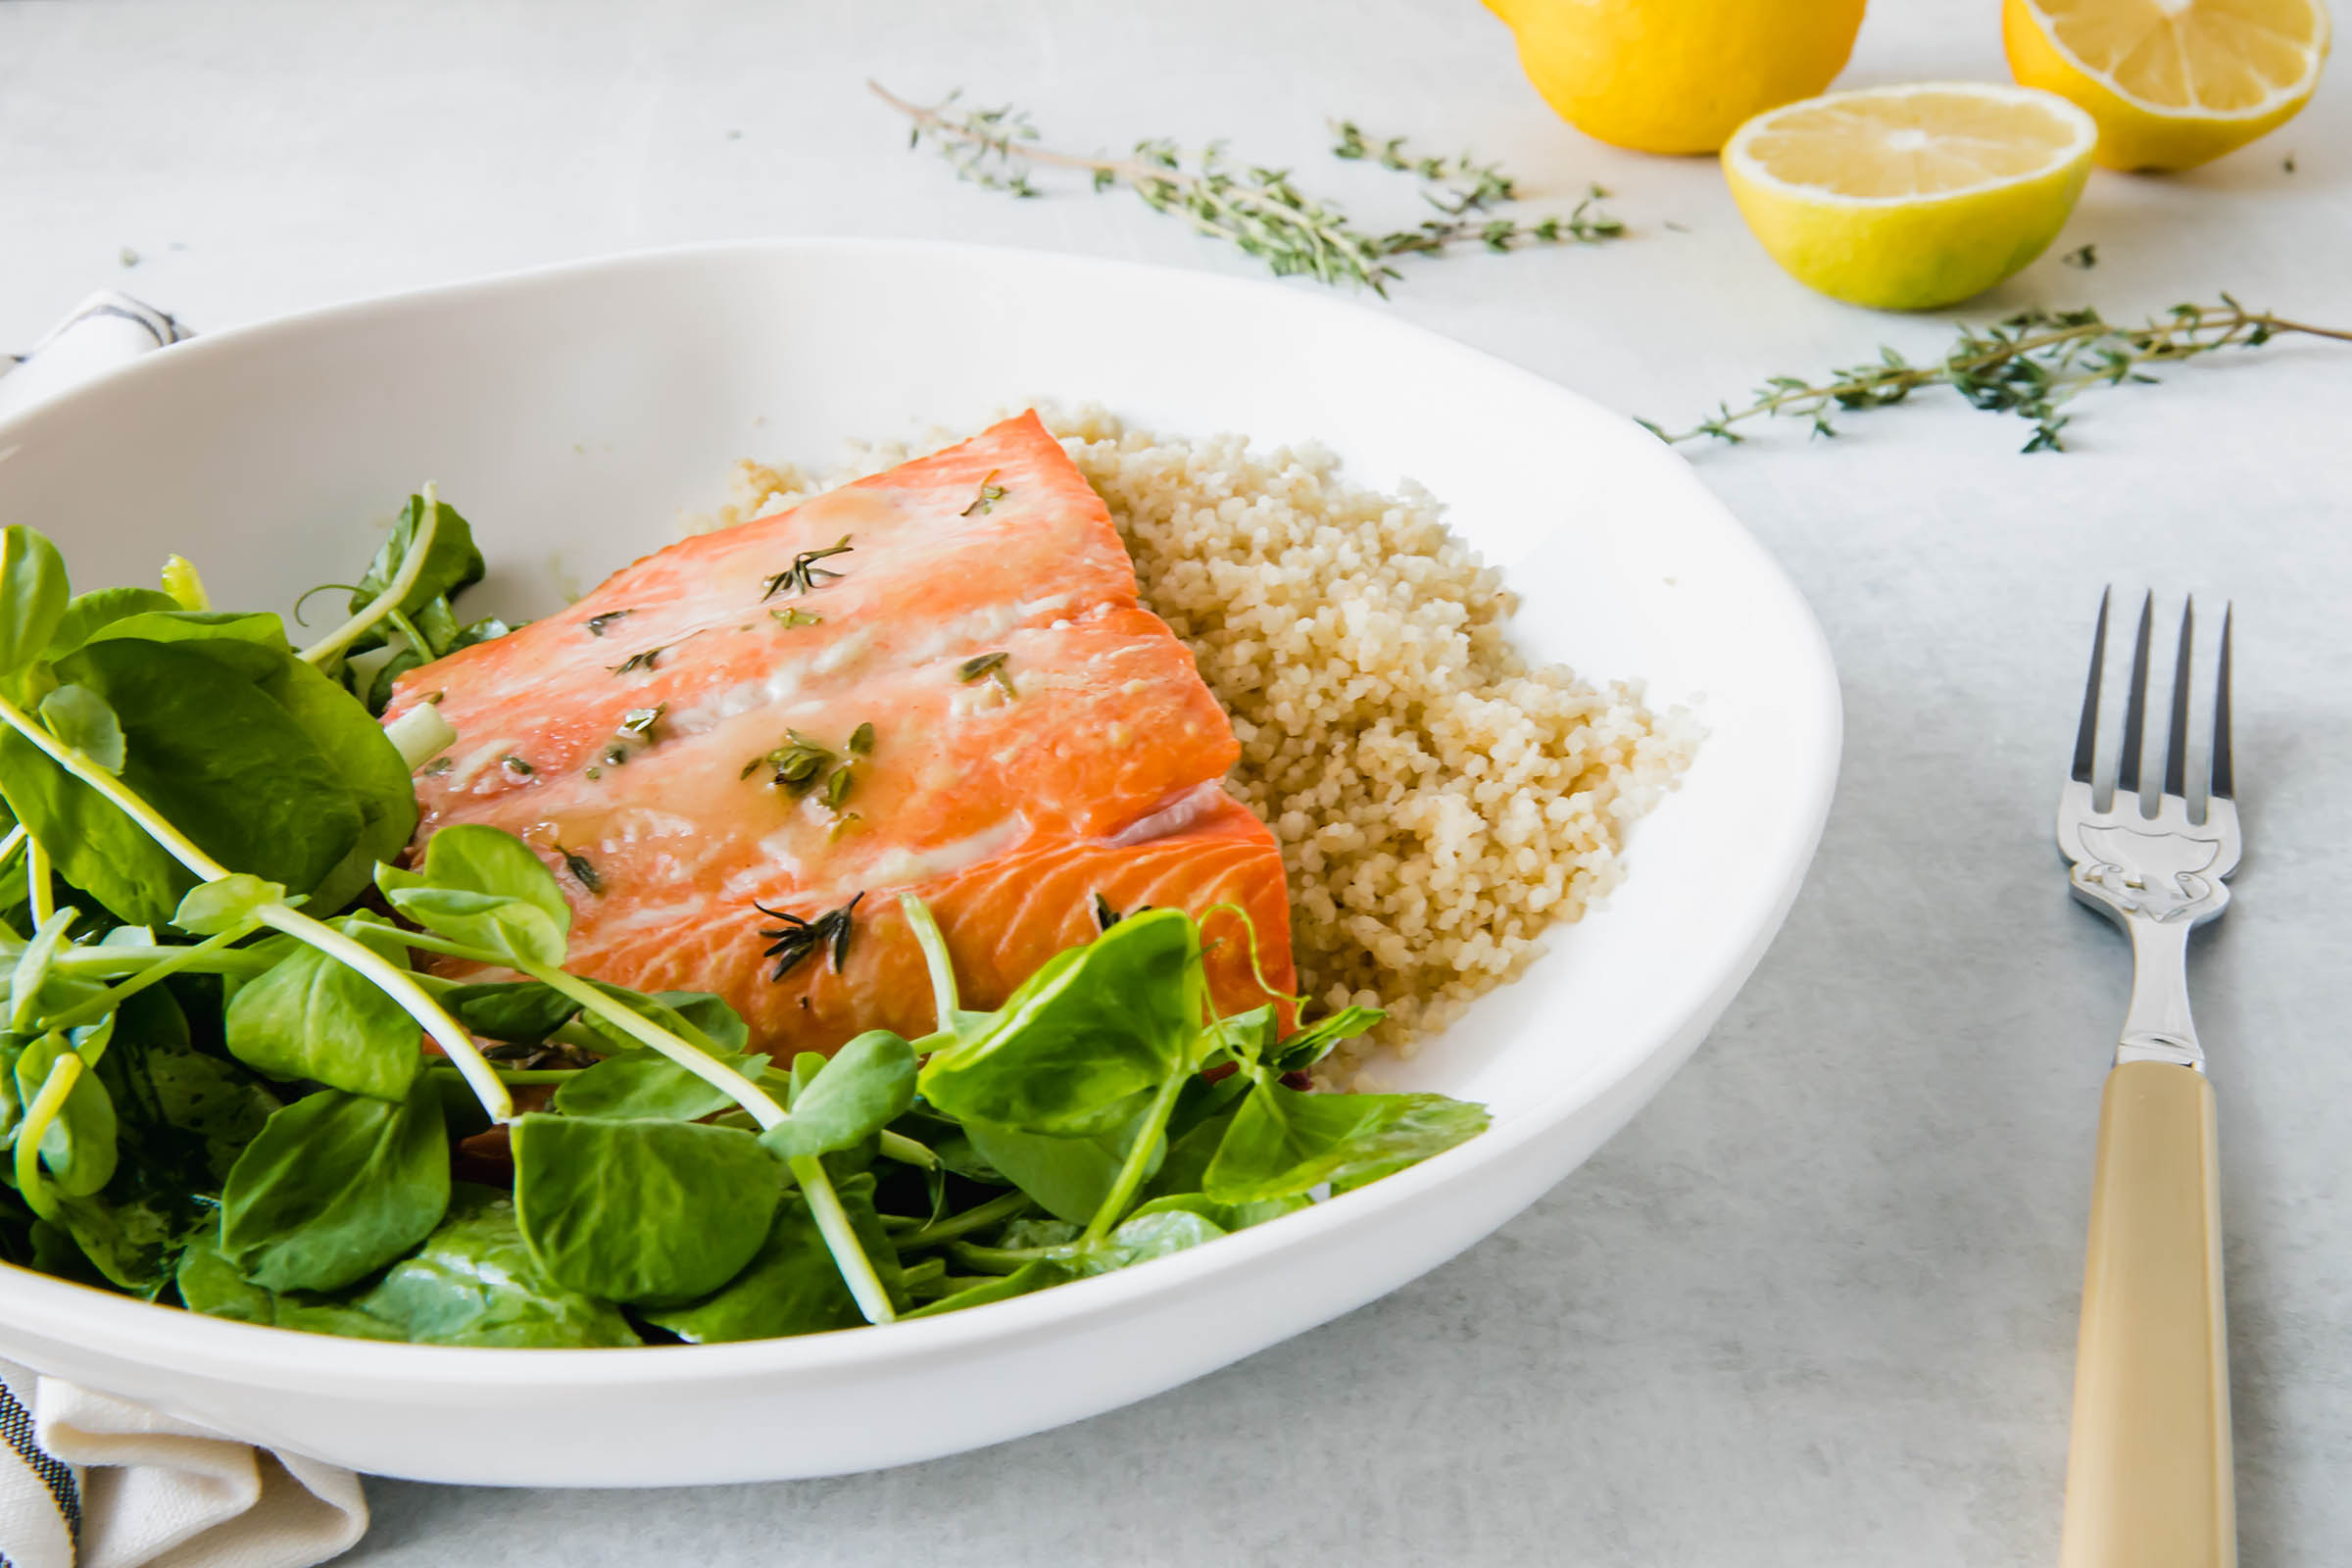 Salmon entree on a bed of couscous and fresh salad greens.